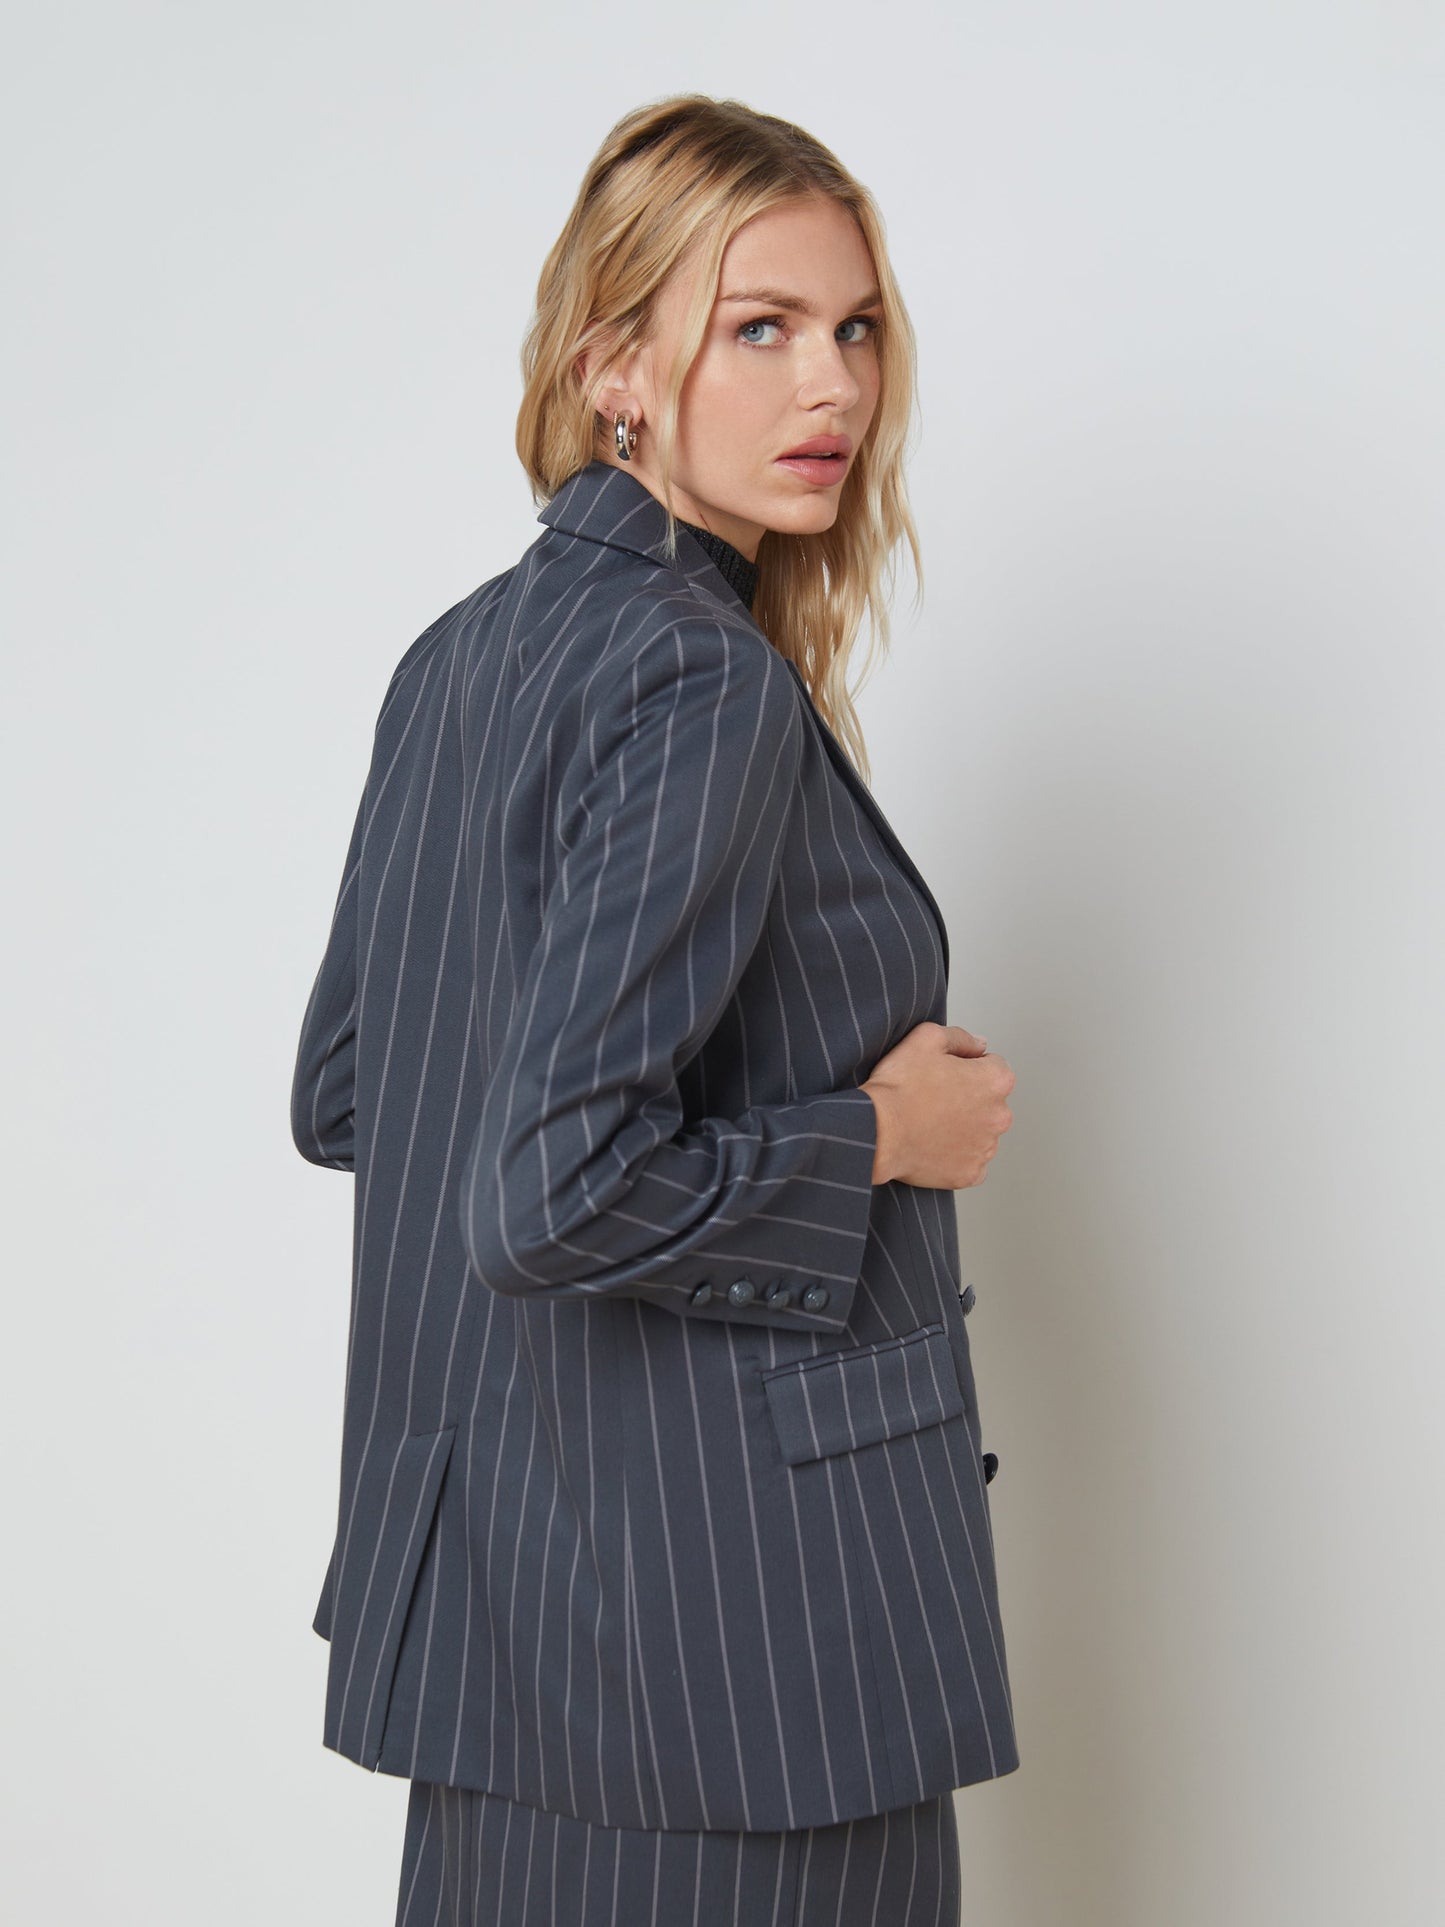 Lagence Aimee Relaxed Double Breasted Blazer